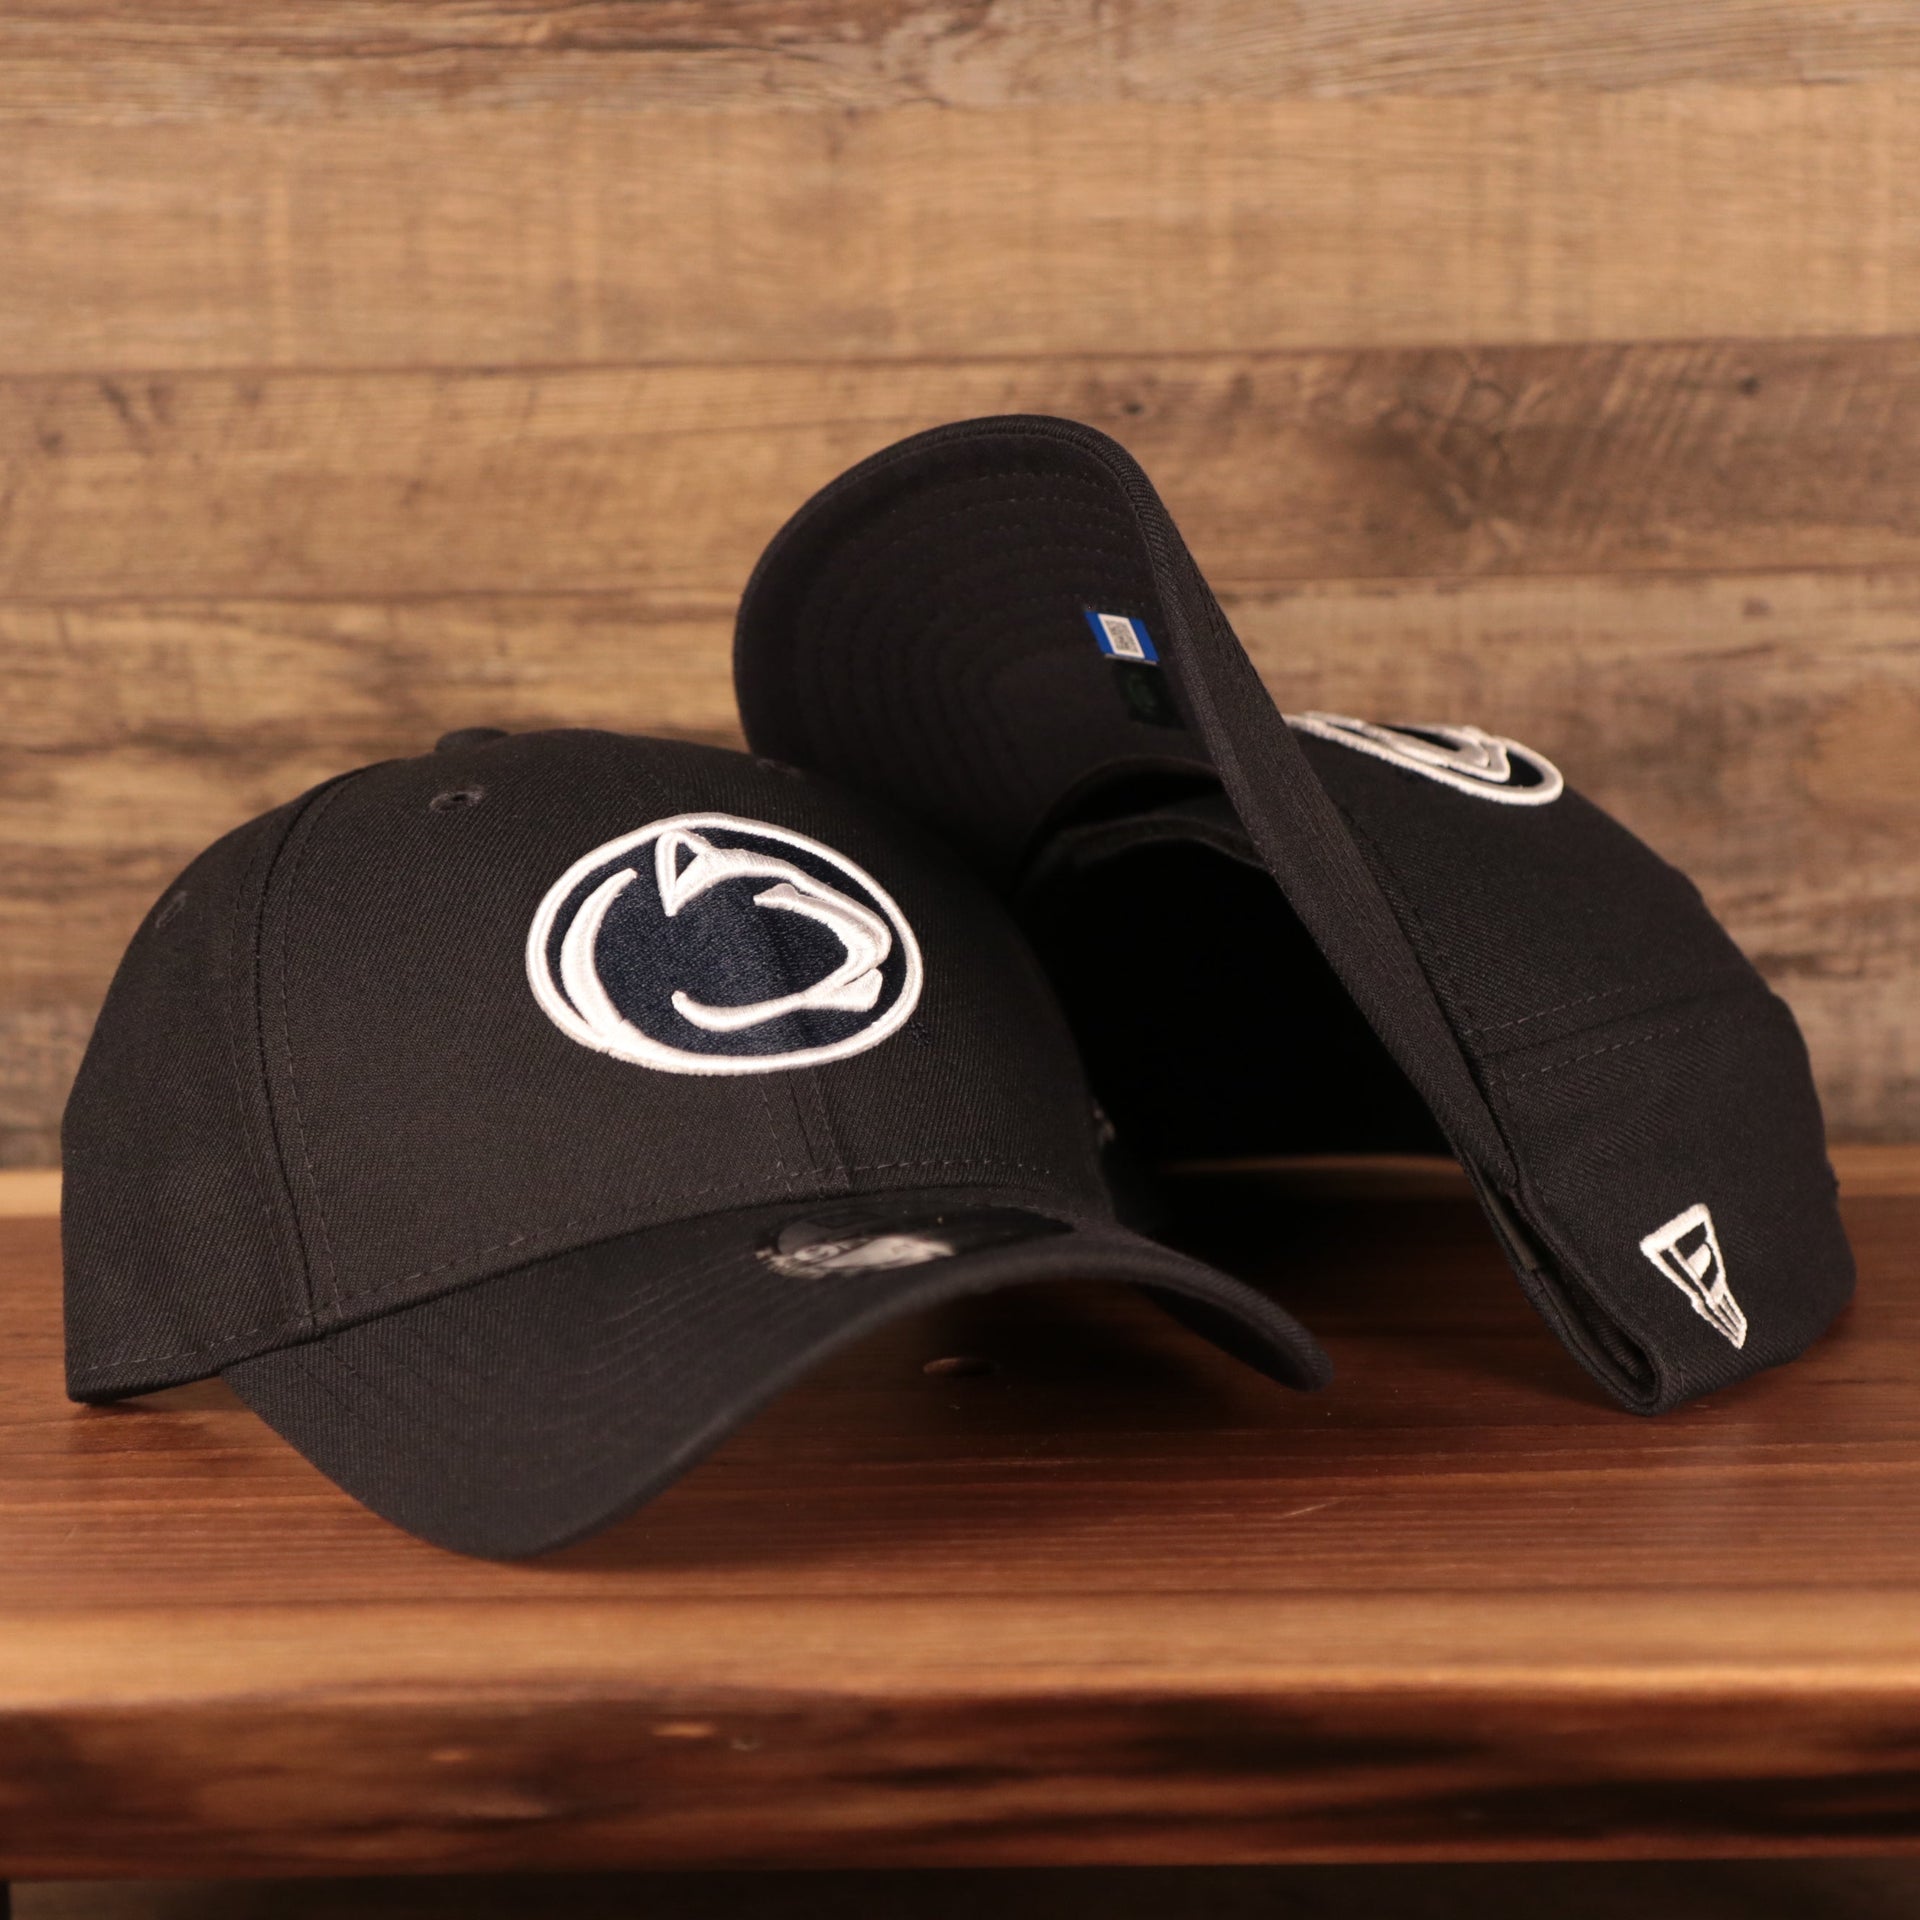 Penn State Nittany Lions The League 940 9Forty Adjustable Dad Hat